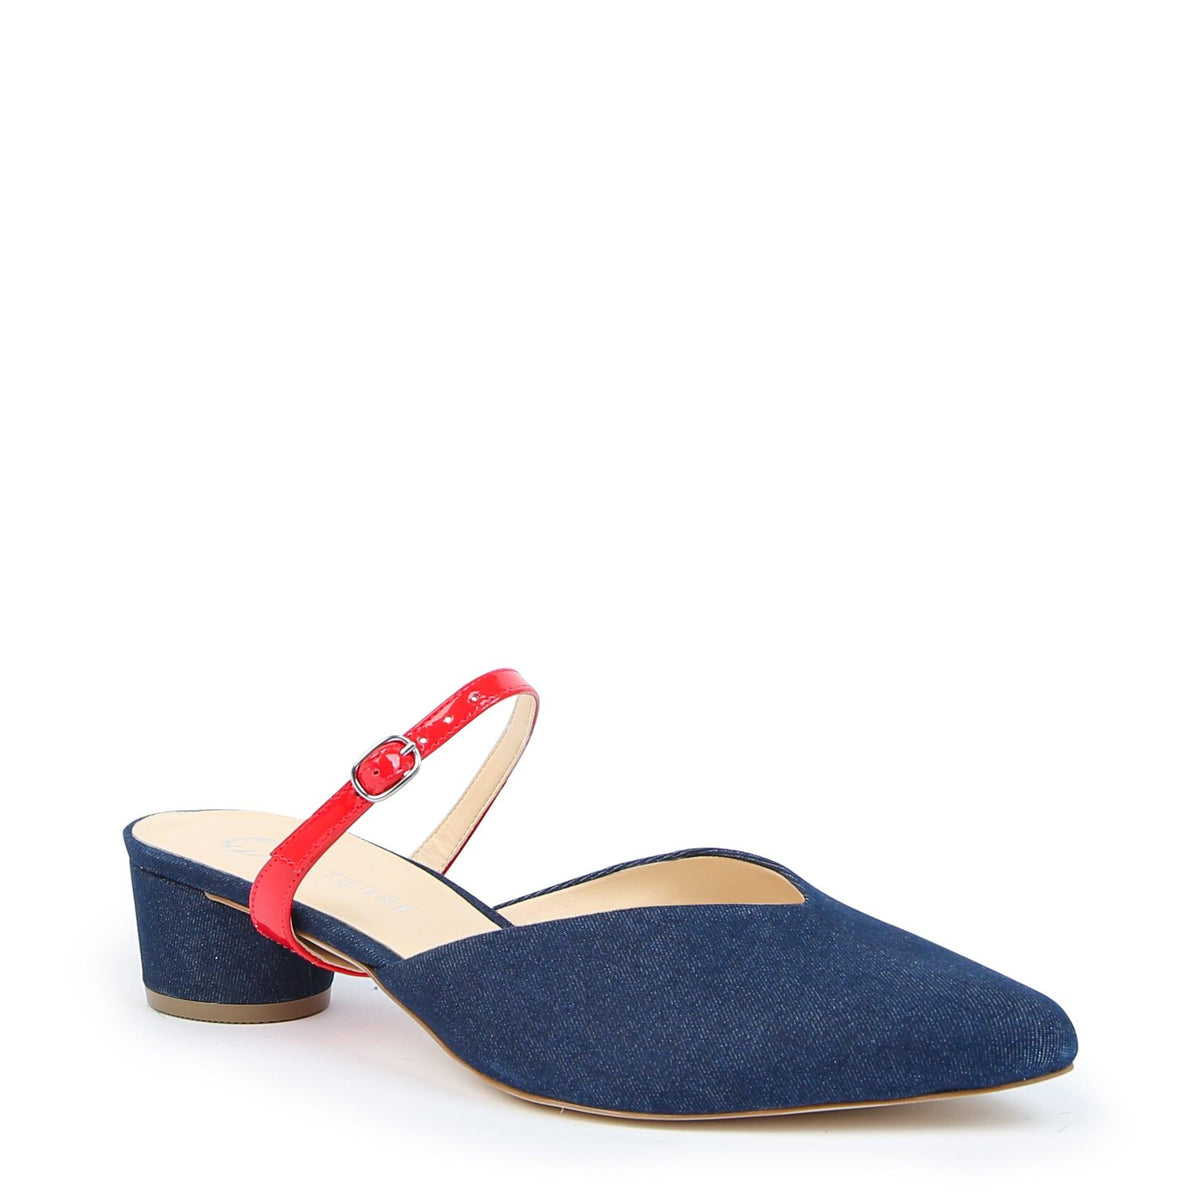 Customizable Recycled Denim Slide + Red Gloss Twiggy Strap | Alterre Make A Shoe - Sustainable Shoes & Ethical Footwear